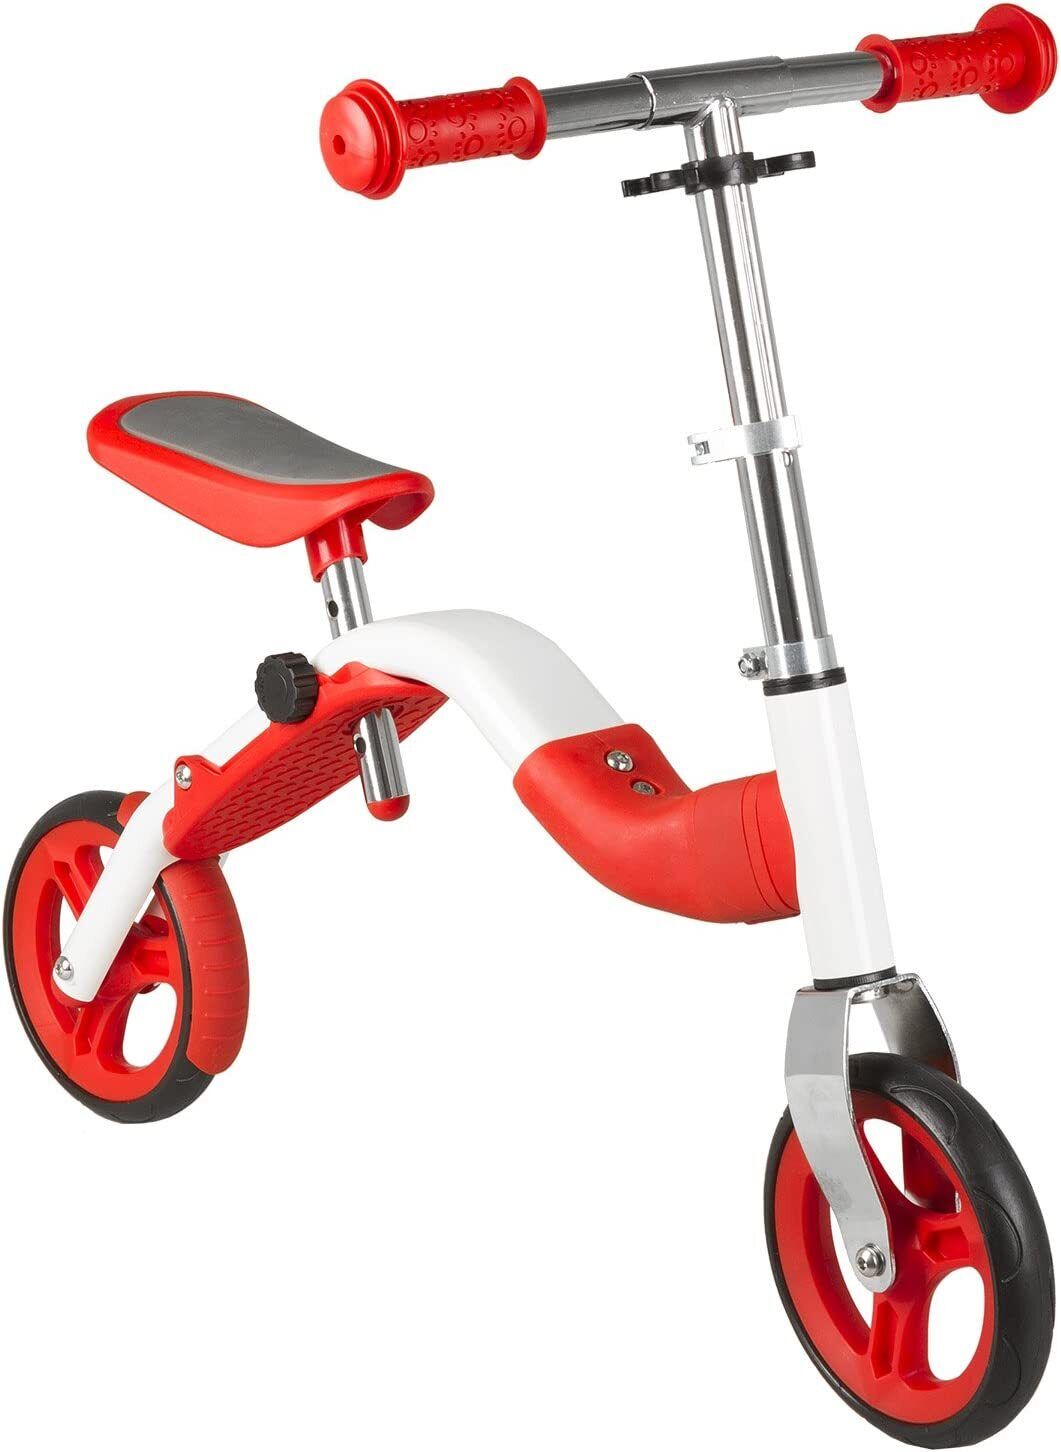 2 In 1 Balance Bike / Scooter For Kids - 2 - 5 years old - Red / Blue Or Green - Sportandleisure.com